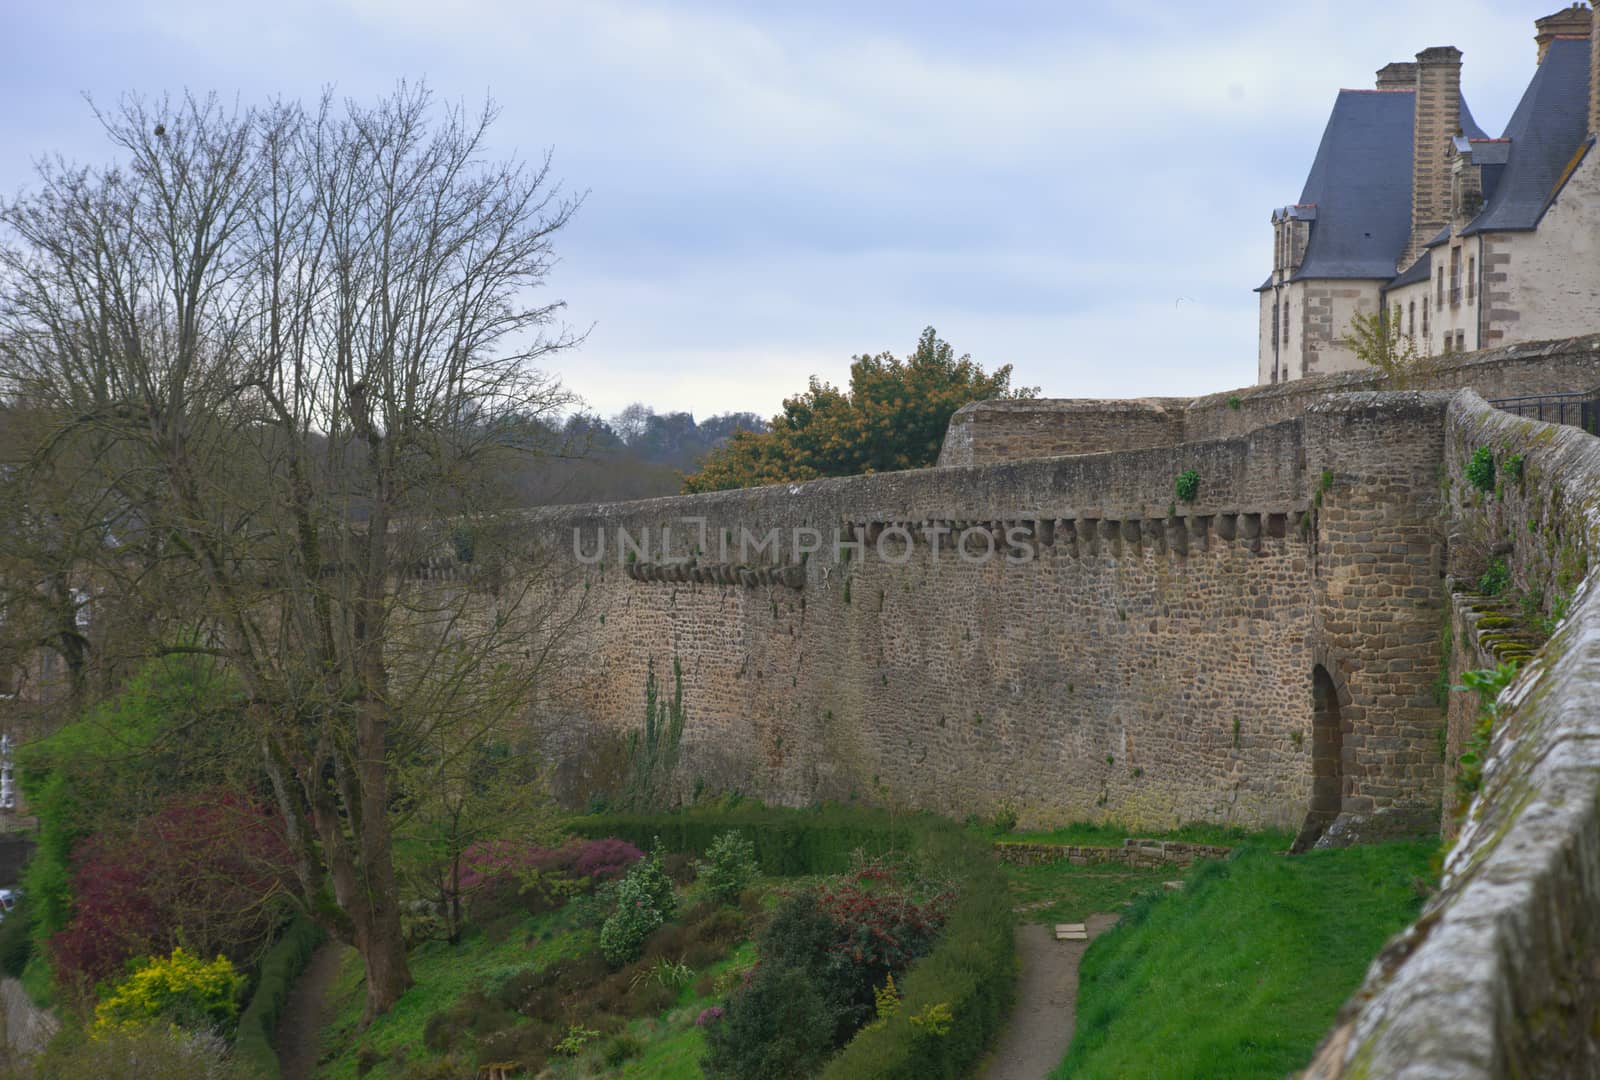 View on huge stone walls at Dinan fortress, France by sheriffkule